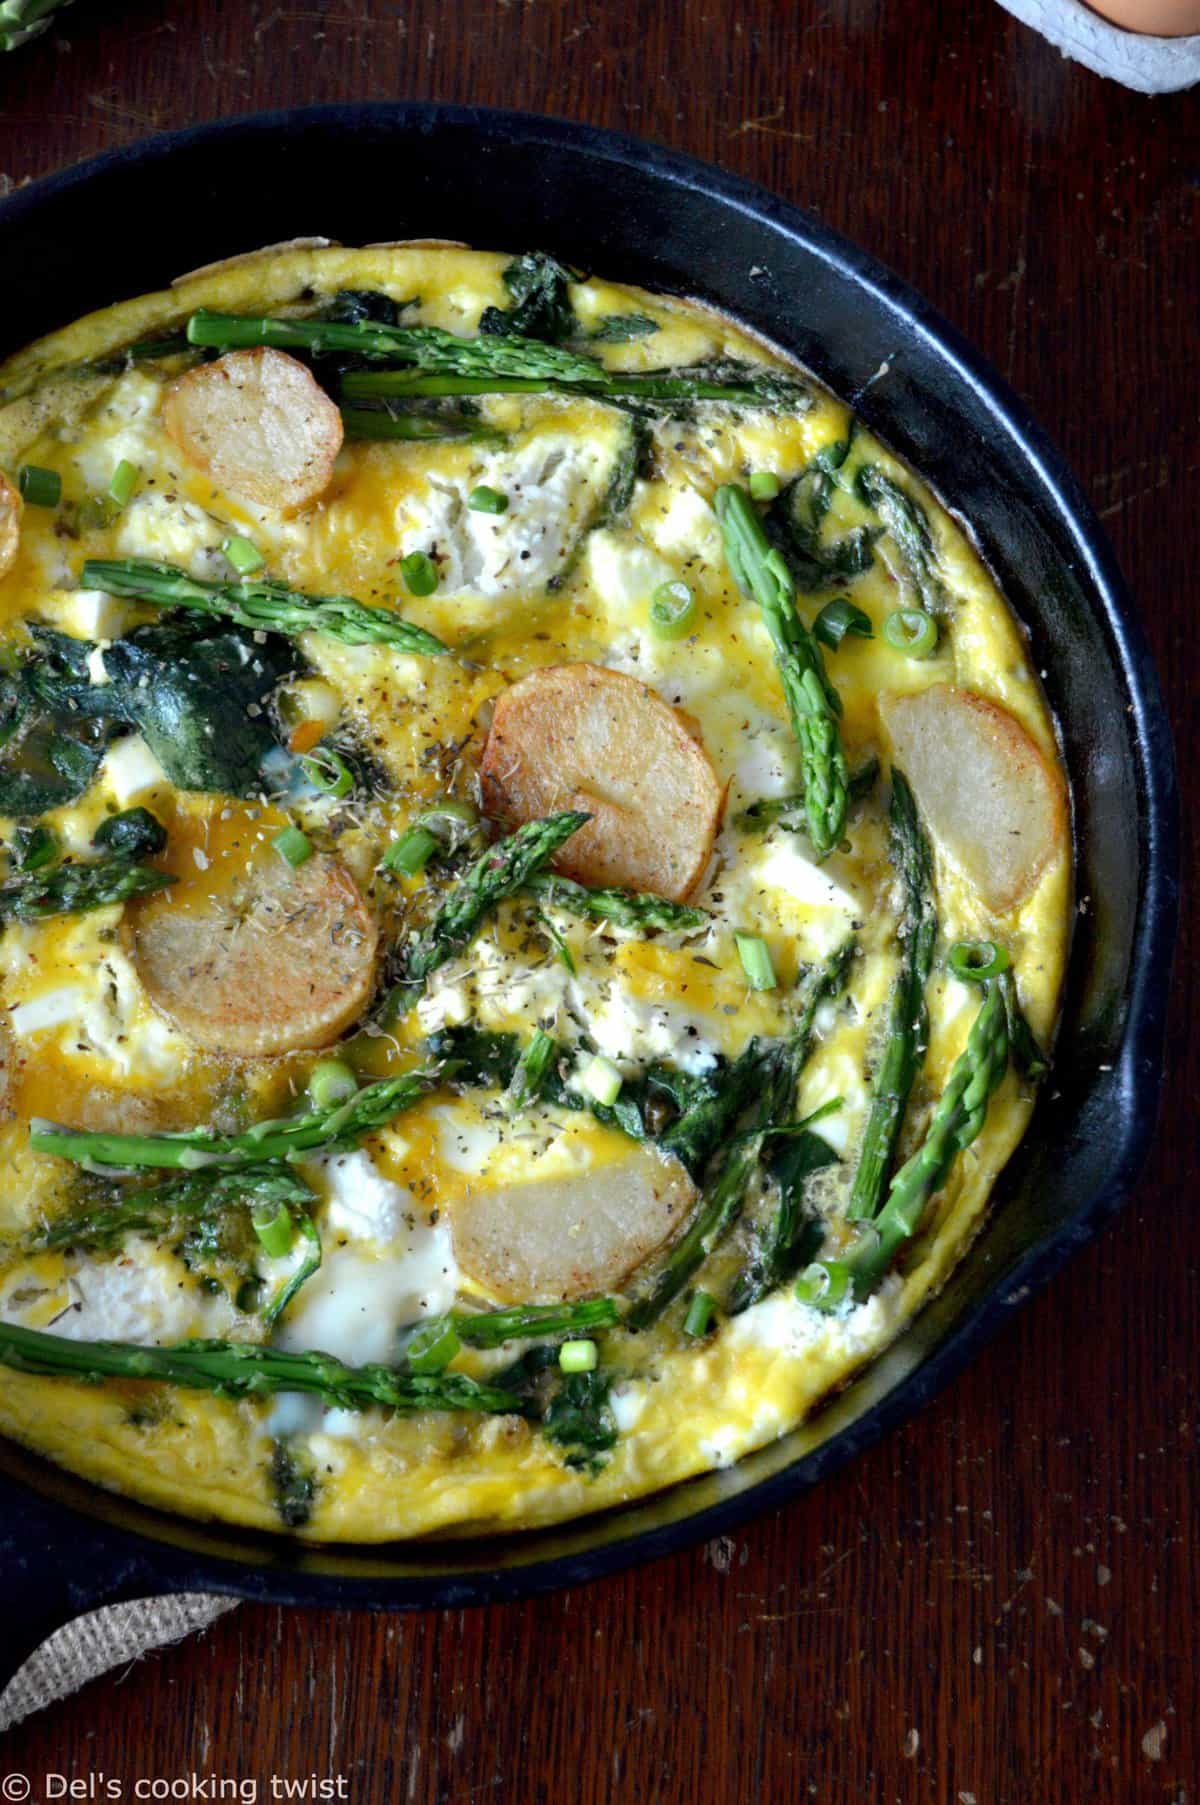 https://www.delscookingtwist.com/wp-content/uploads/2017/04/Ricotta-Frittata-with-Spring-Vegetables_0623.jpg